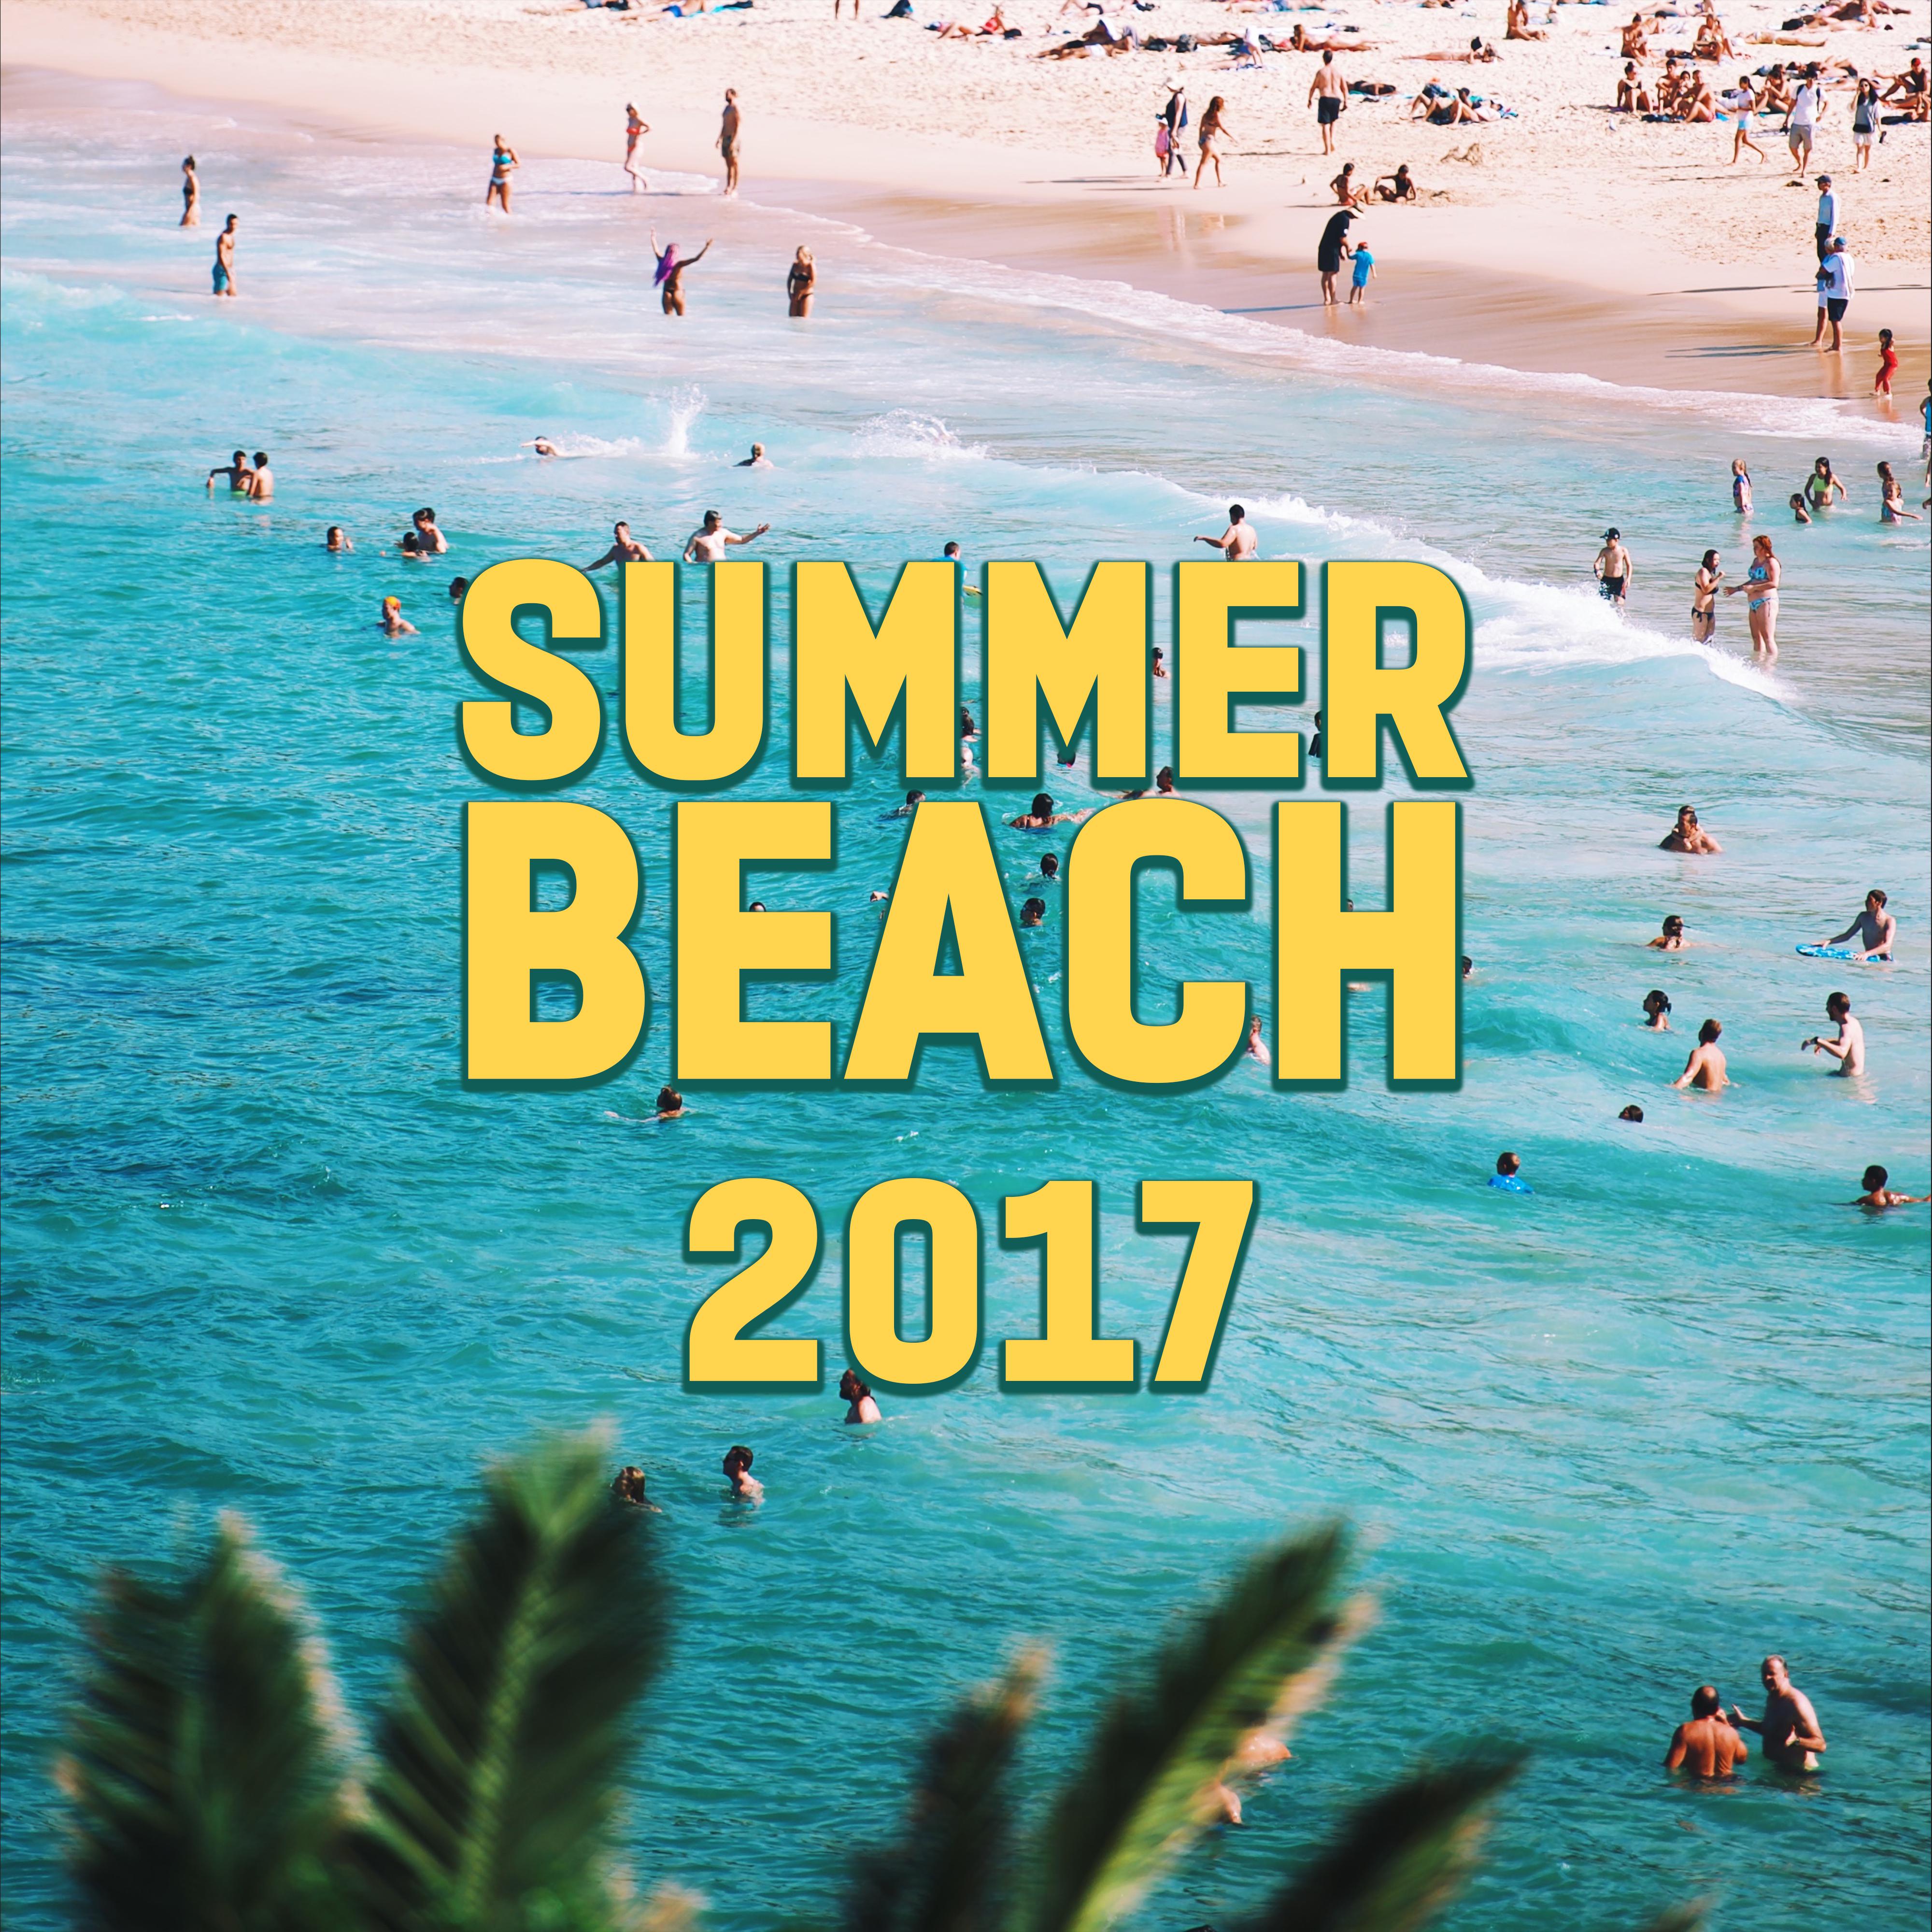 Summer Beach 2017  Chill Out 2017, Dj Chillout, Party, Dance, Relax, Fresh Hits, Summer Lounge